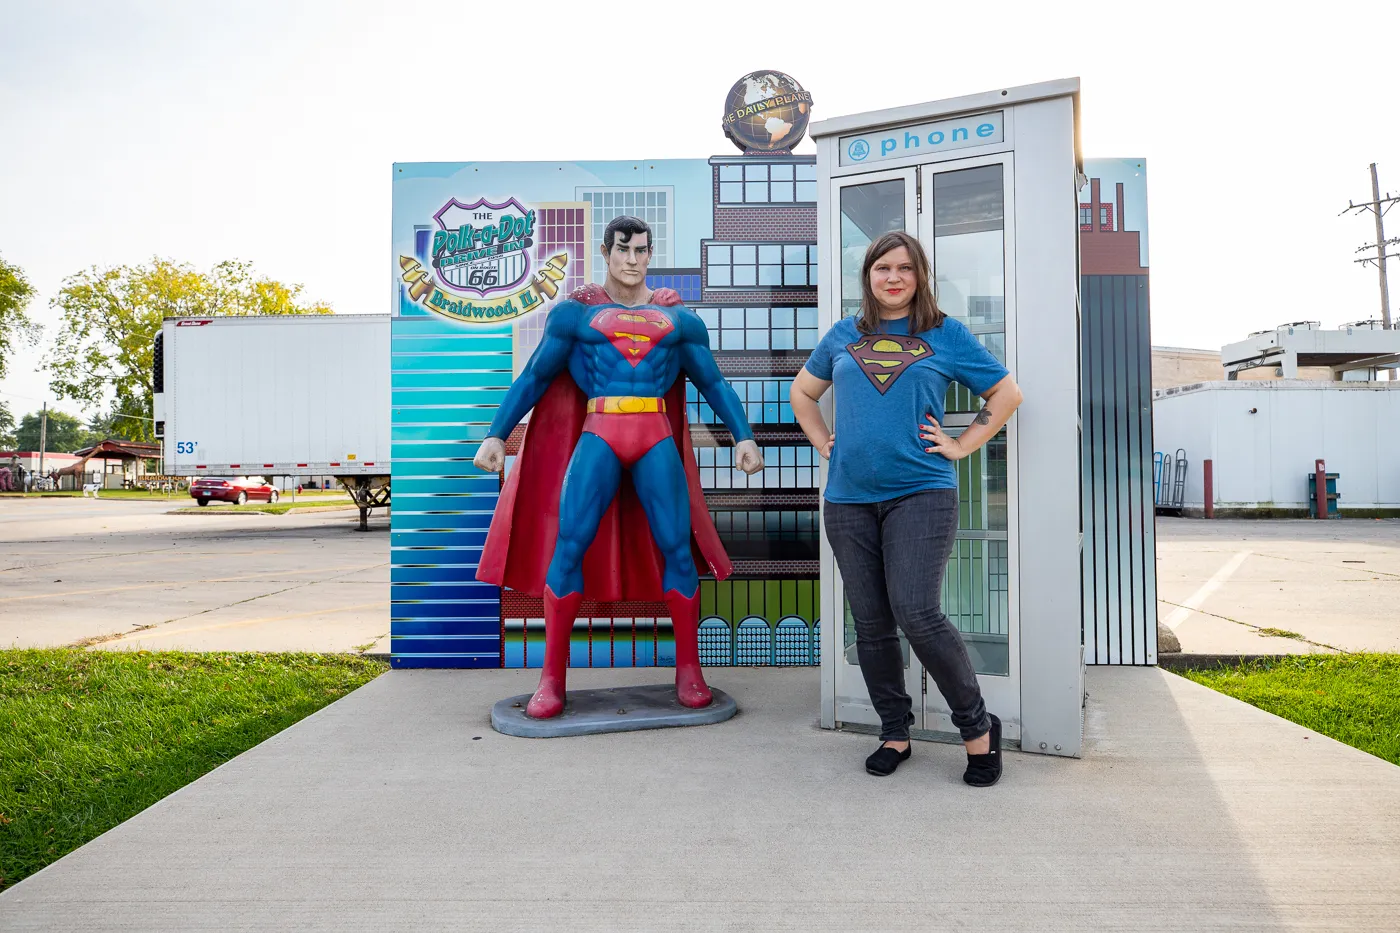 Superman and phone booth photo op at  the Route 66 Polk-a-Dot Drive In in Braidwood, Illinois